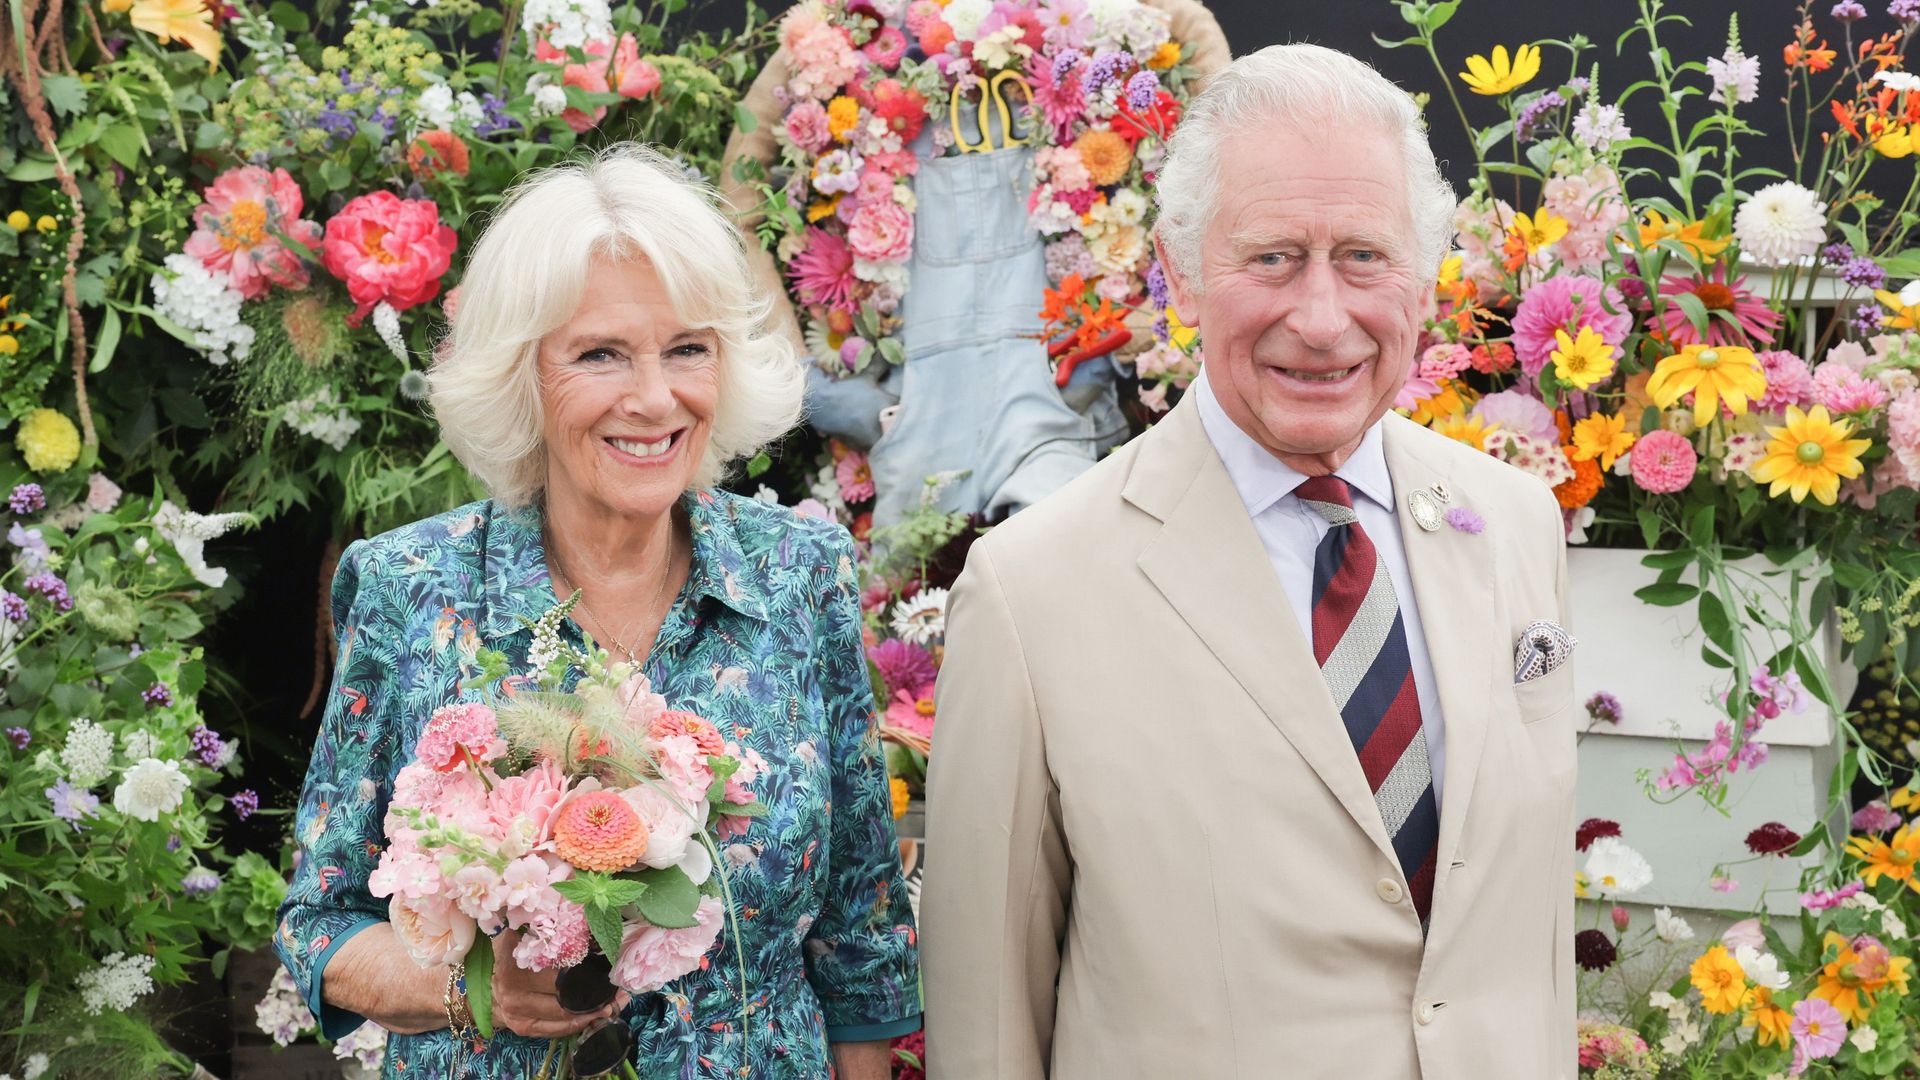 Charles and Camilla surrounded by flowers in Sandringham